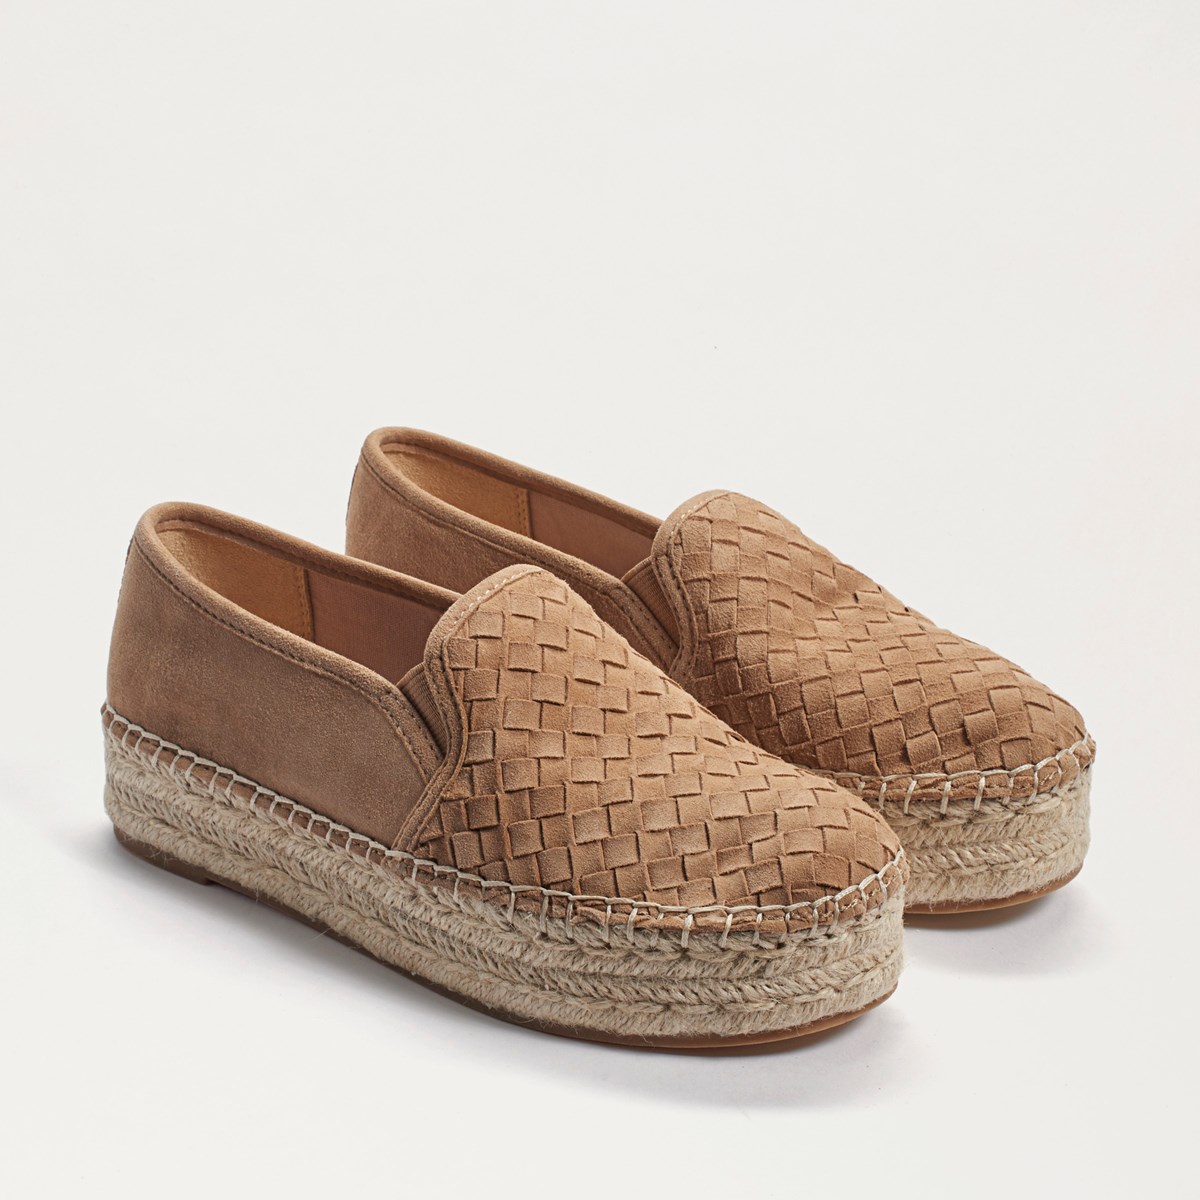 stacked espadrilles